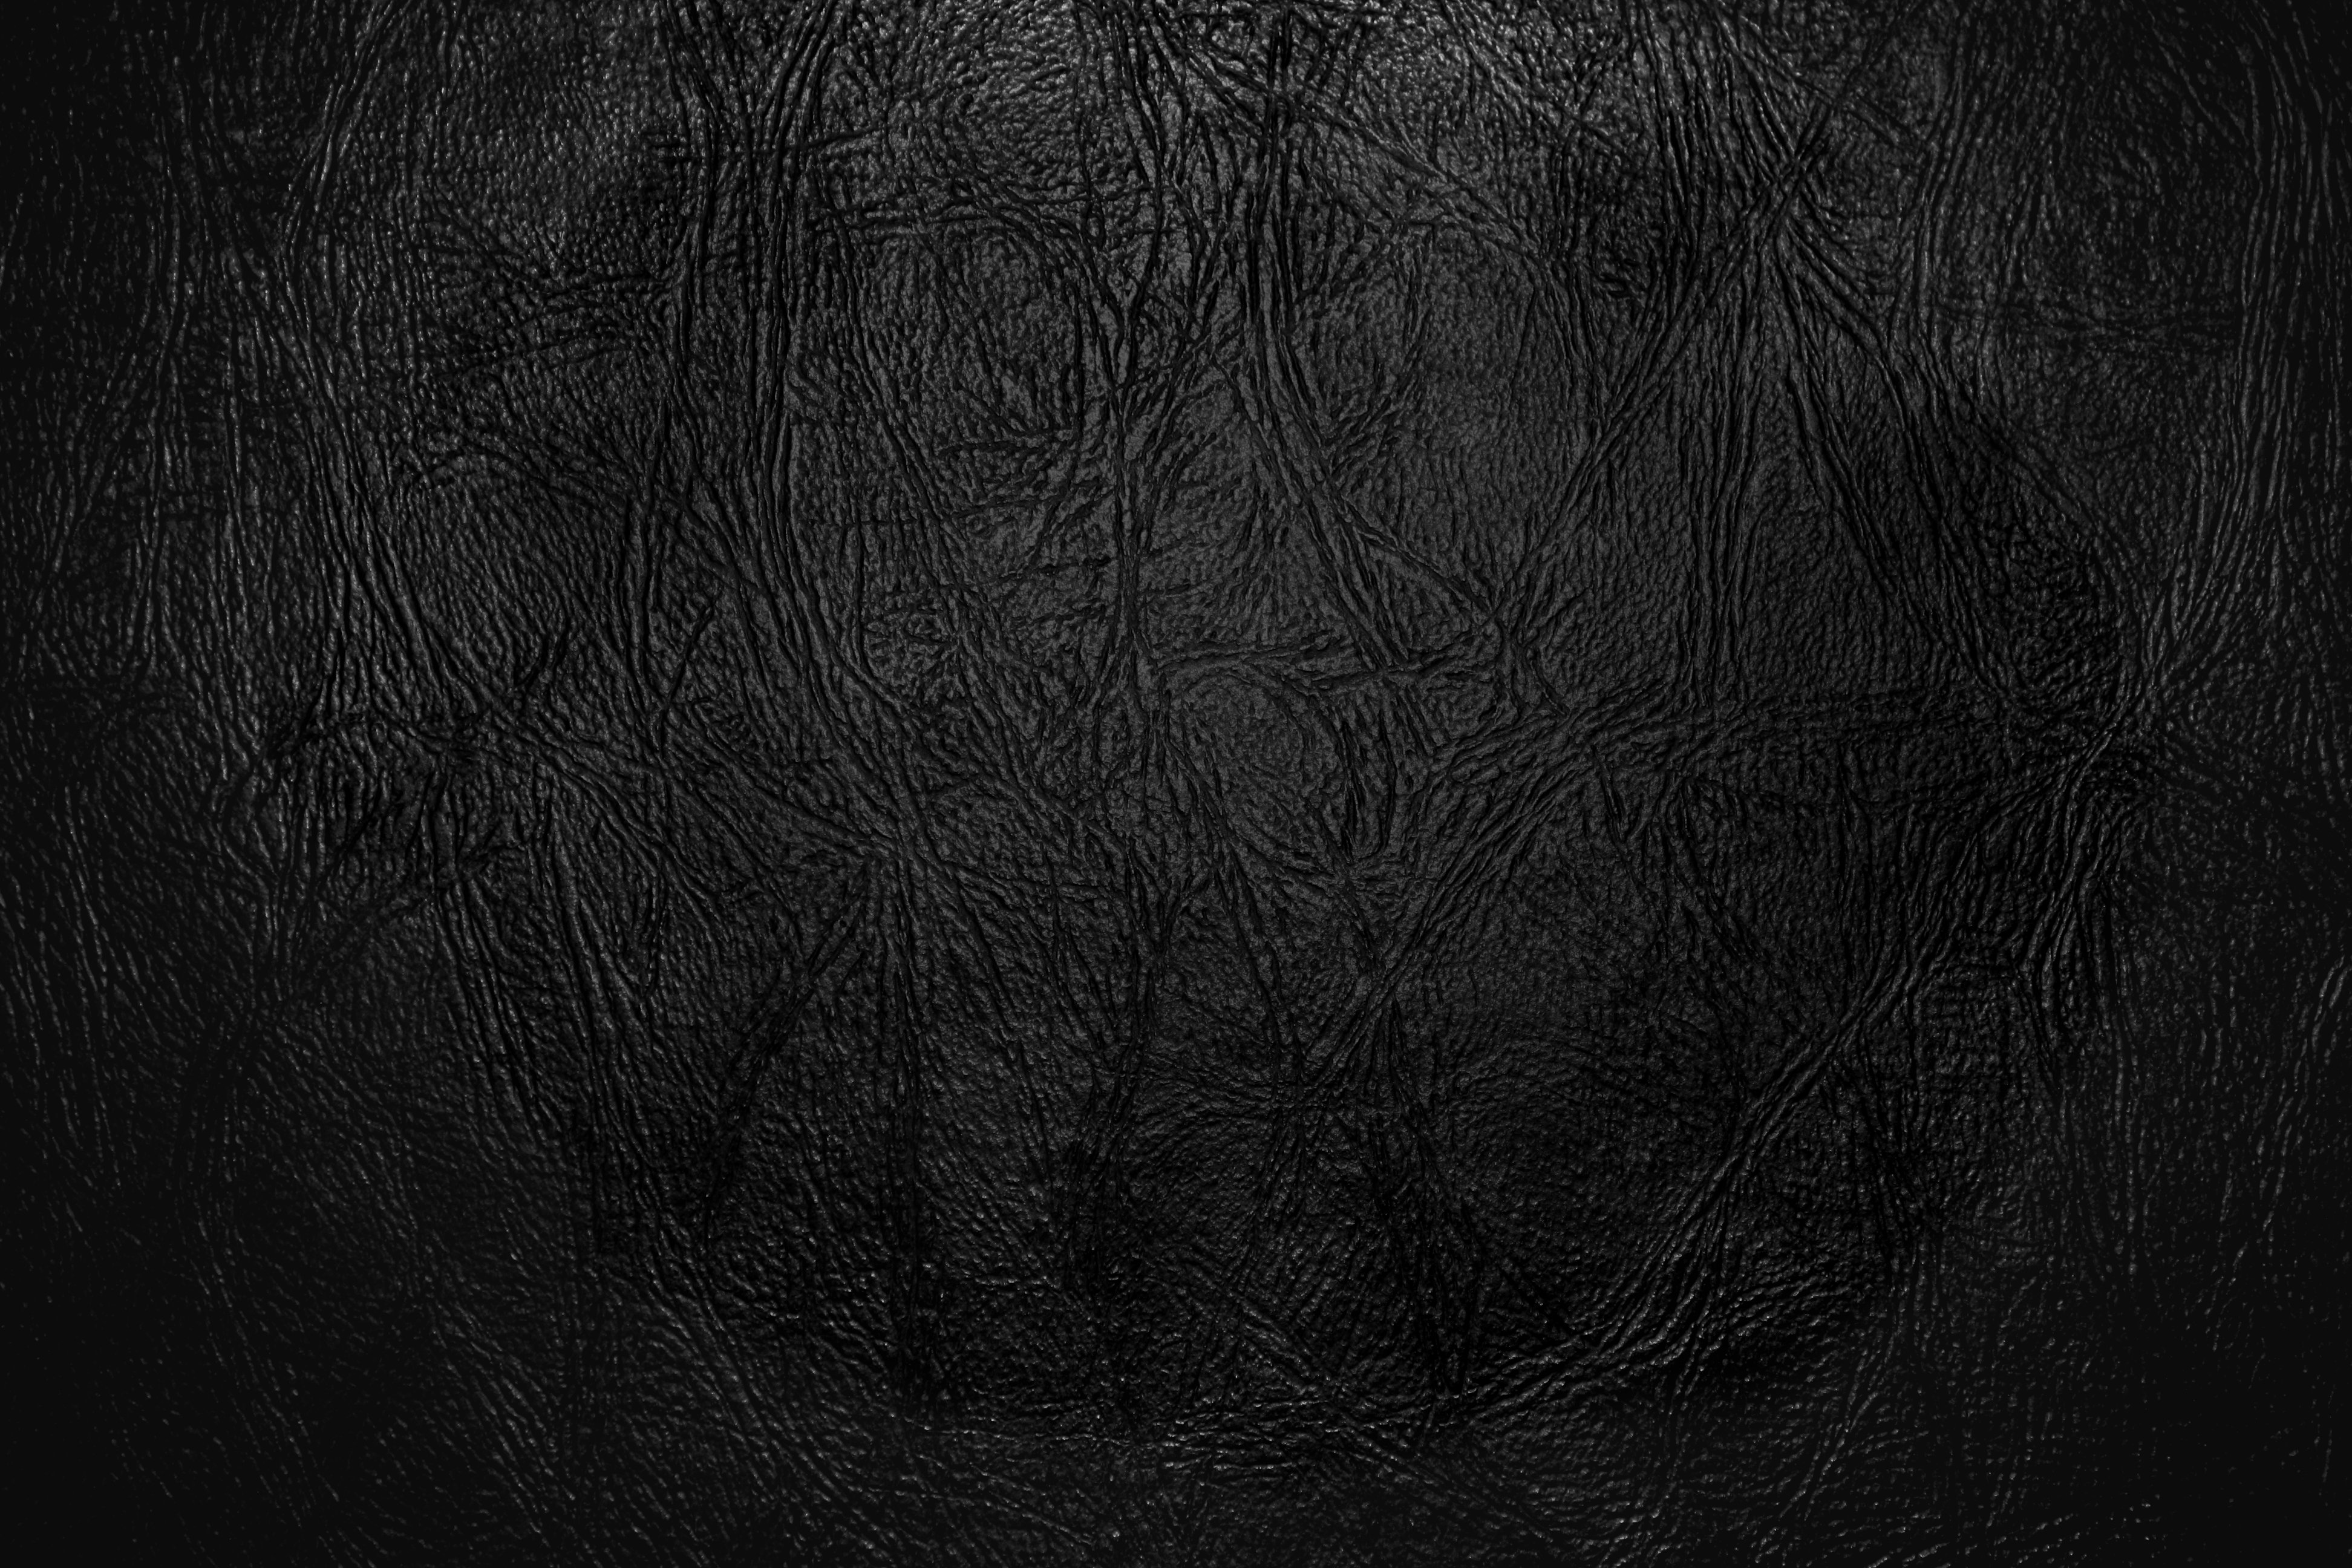 Black Leather Texture. Image & Photo (Free Trial)